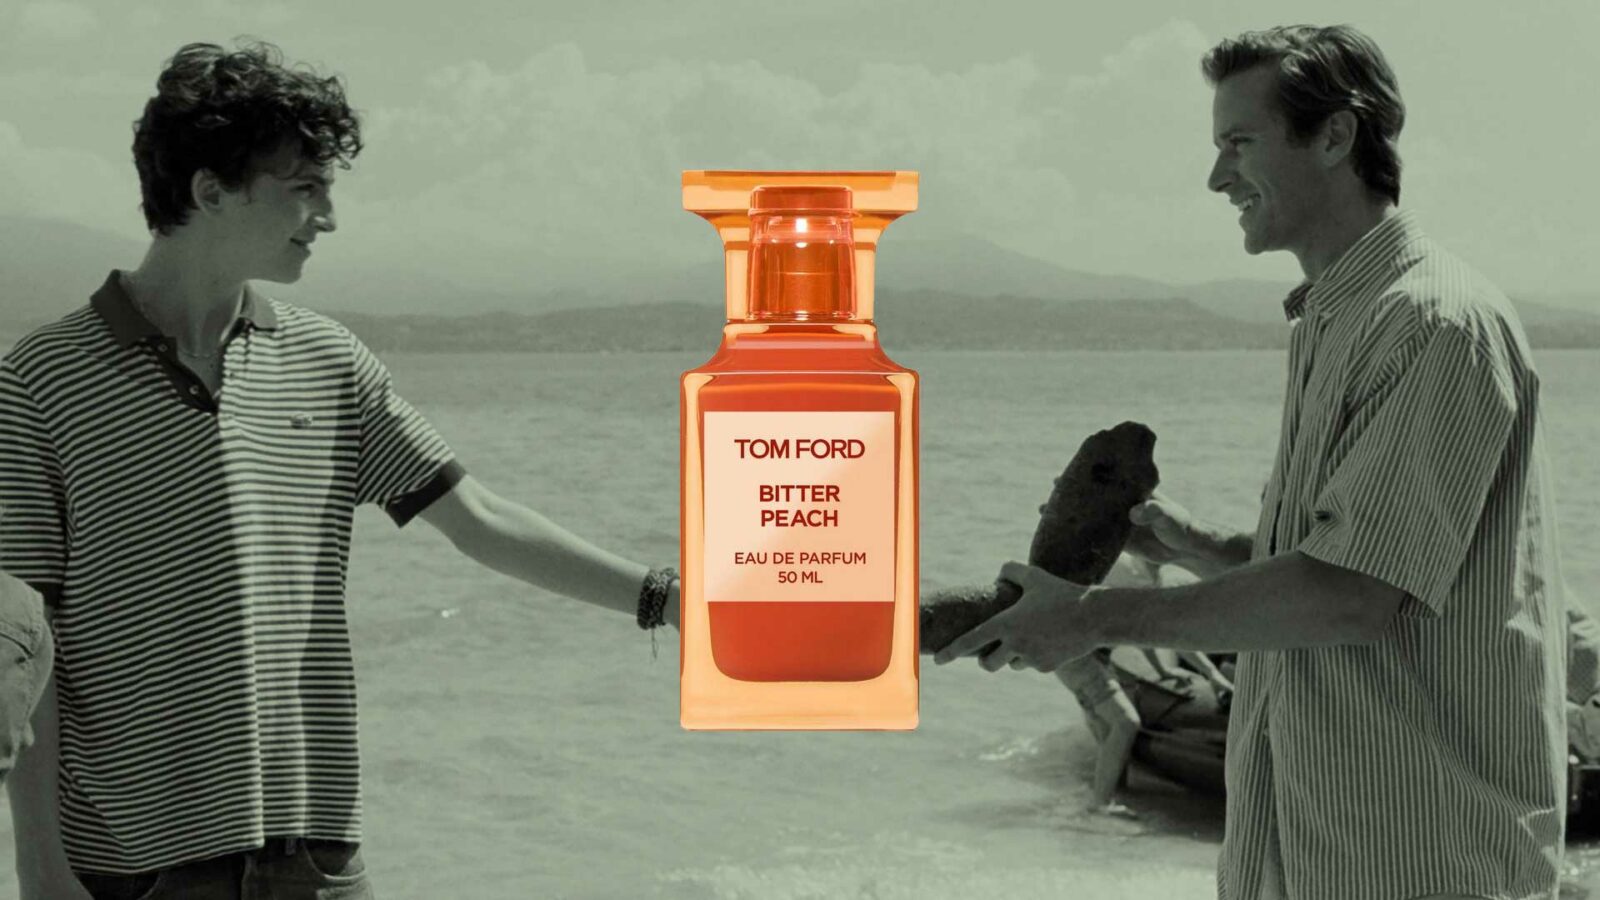 Revisit A First Love In Call Me By Your Name With This Peachy Scent